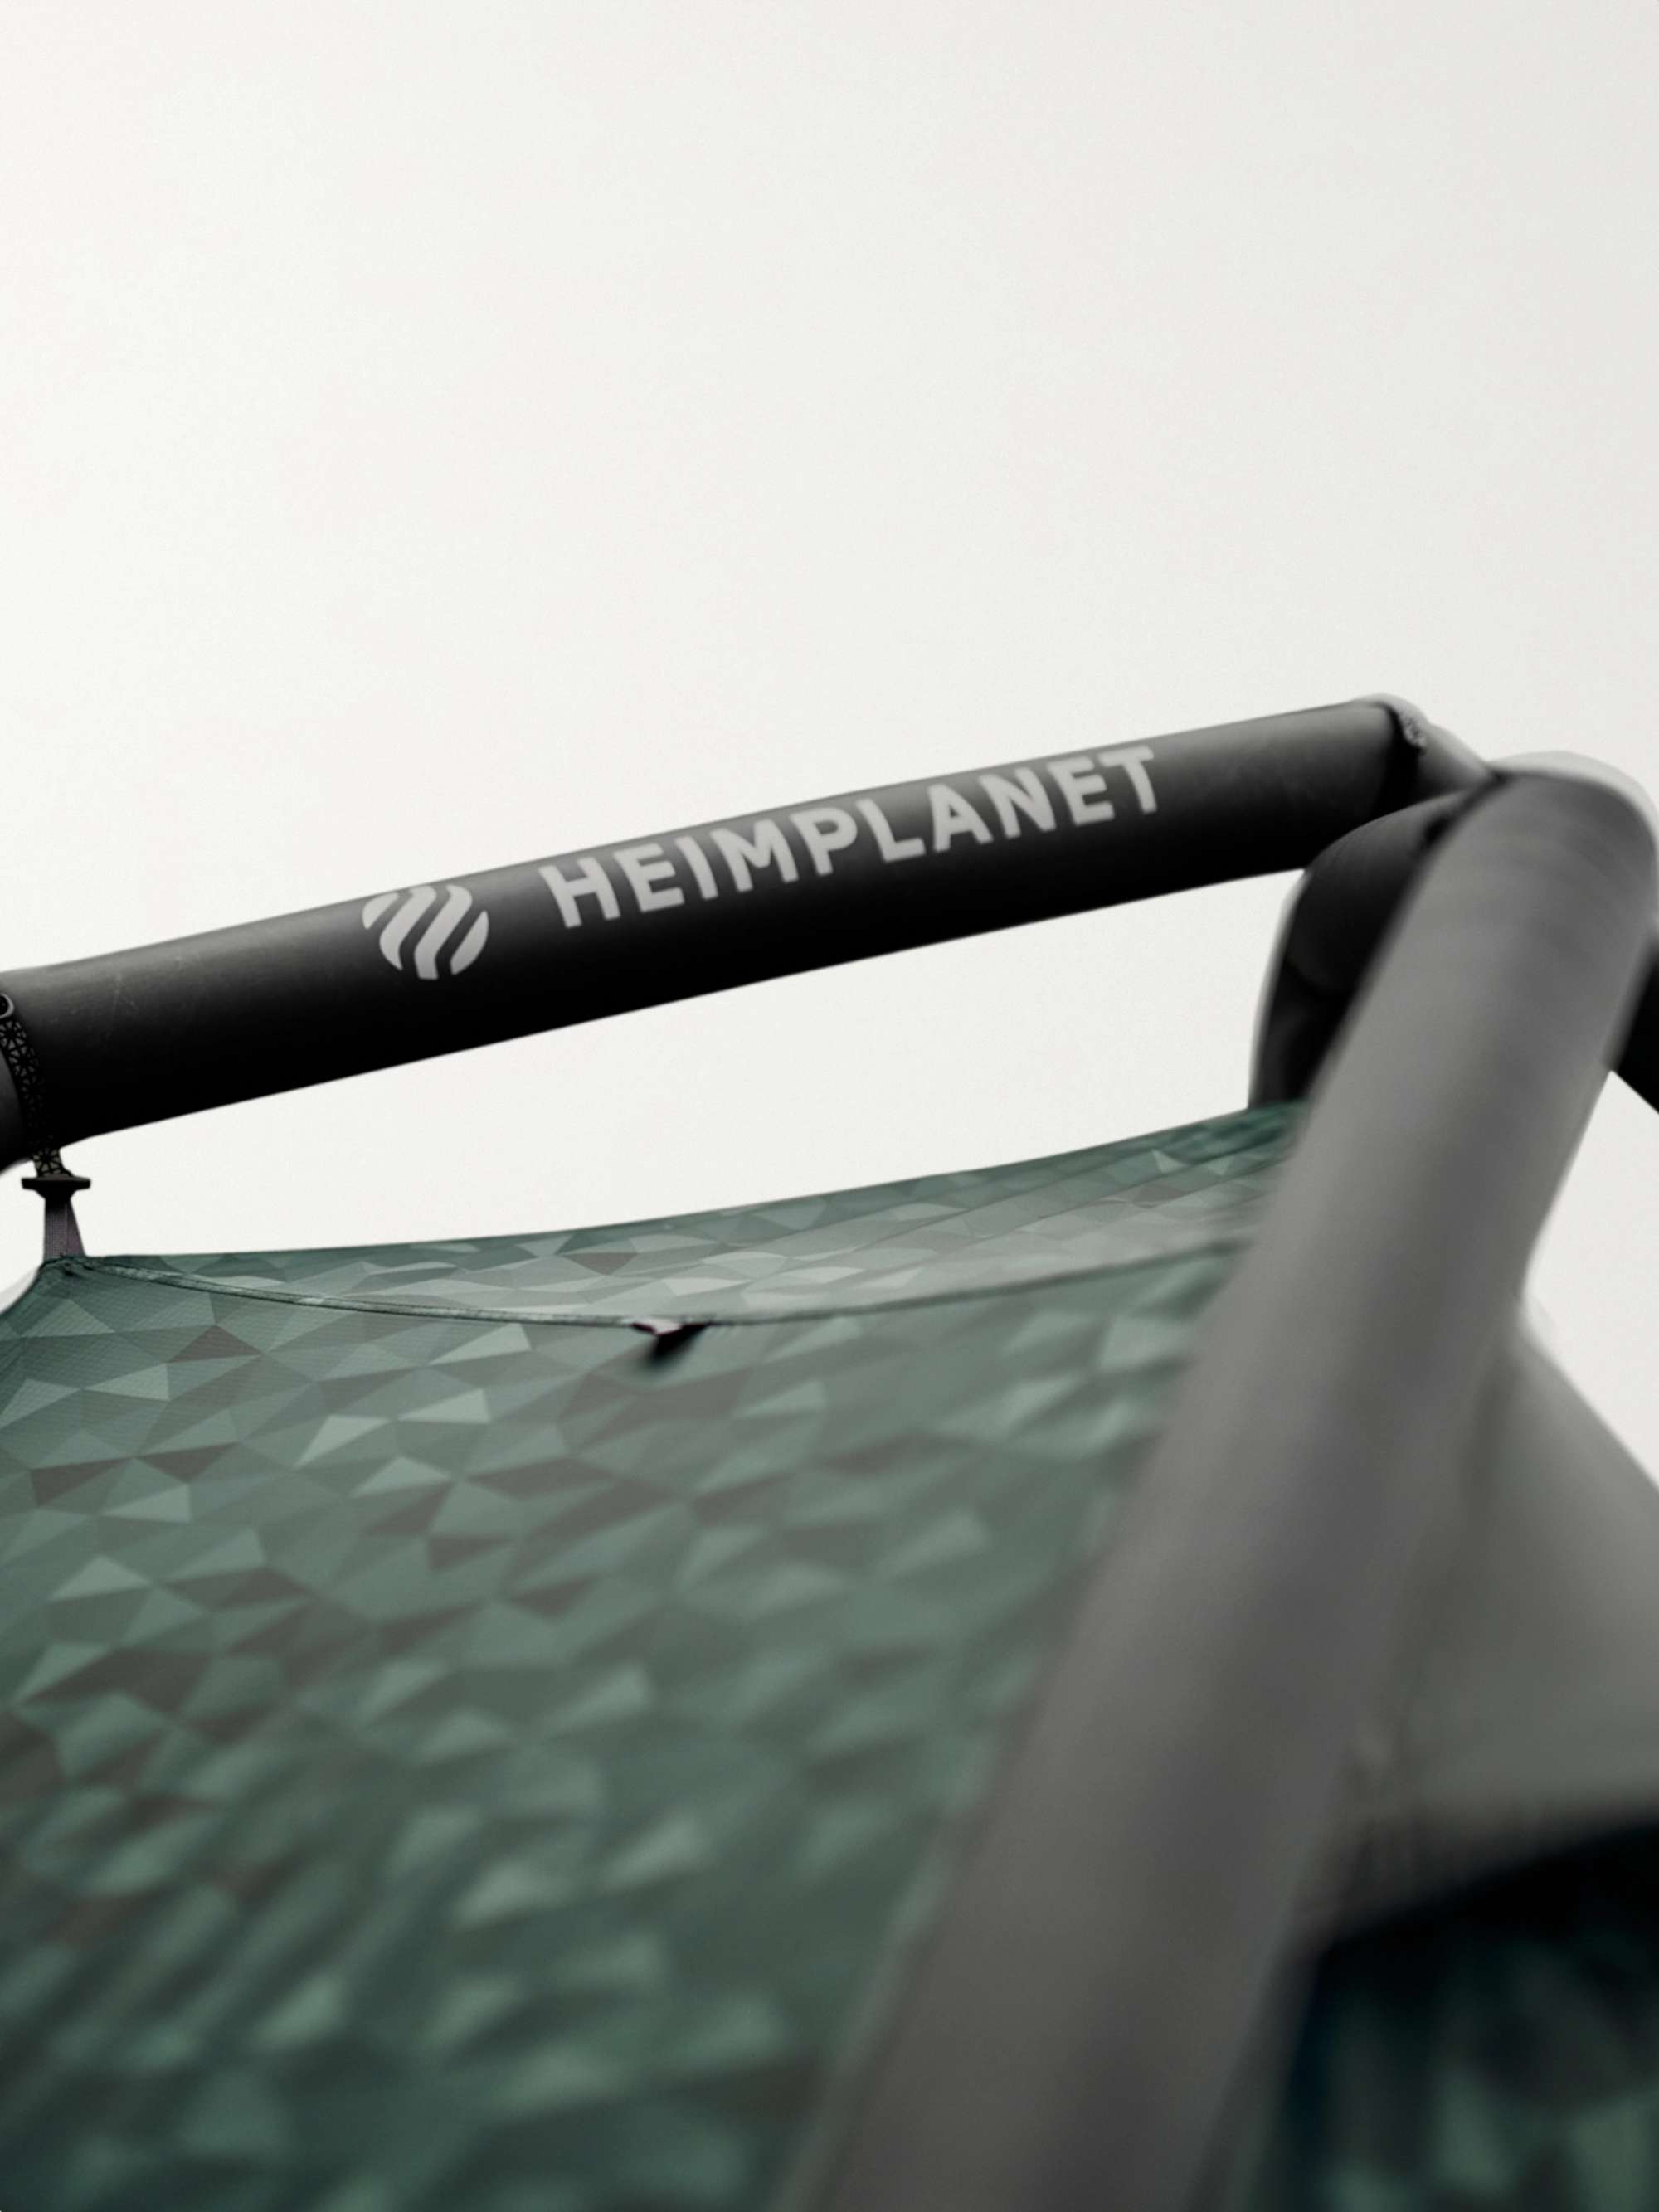 HEIMPLANET Fistral Printed Inflatable Tent